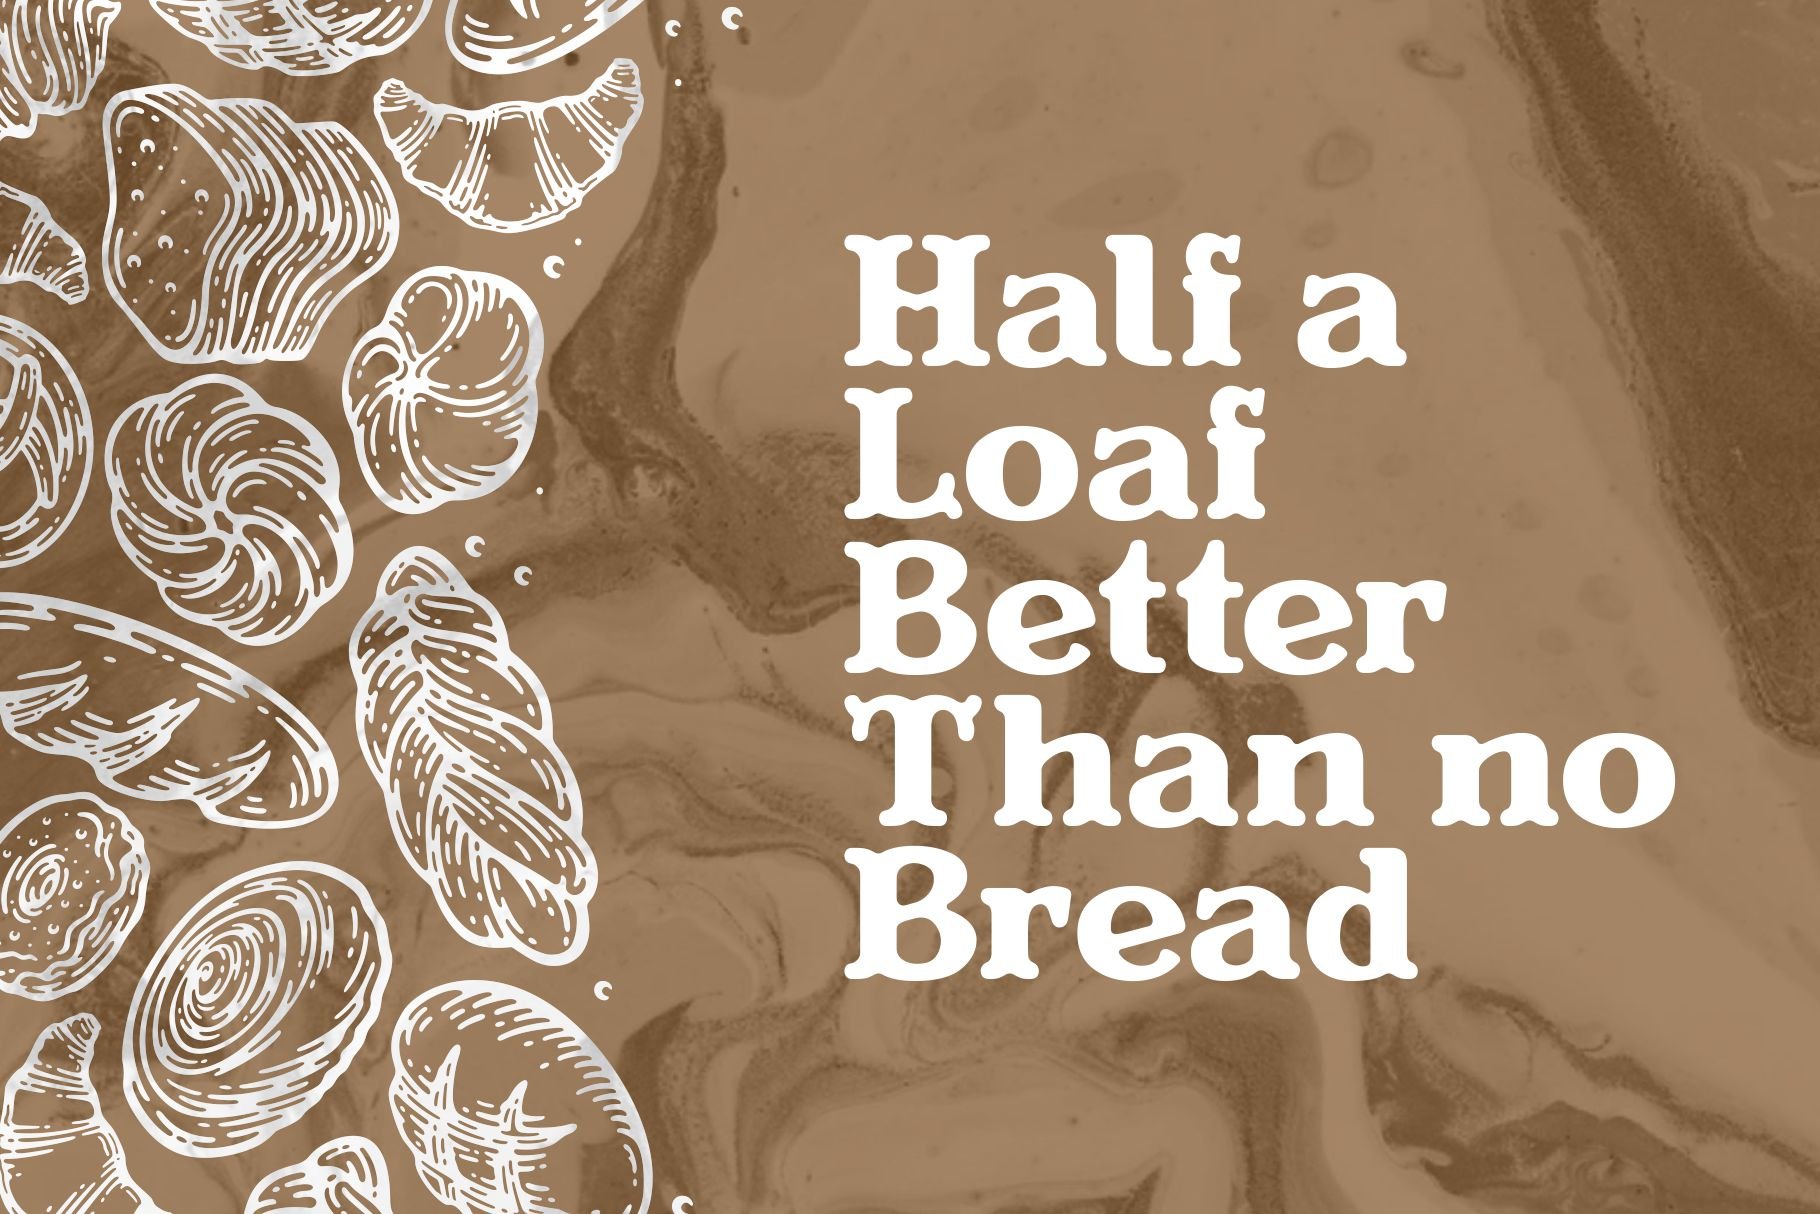 Background with bread illustration.